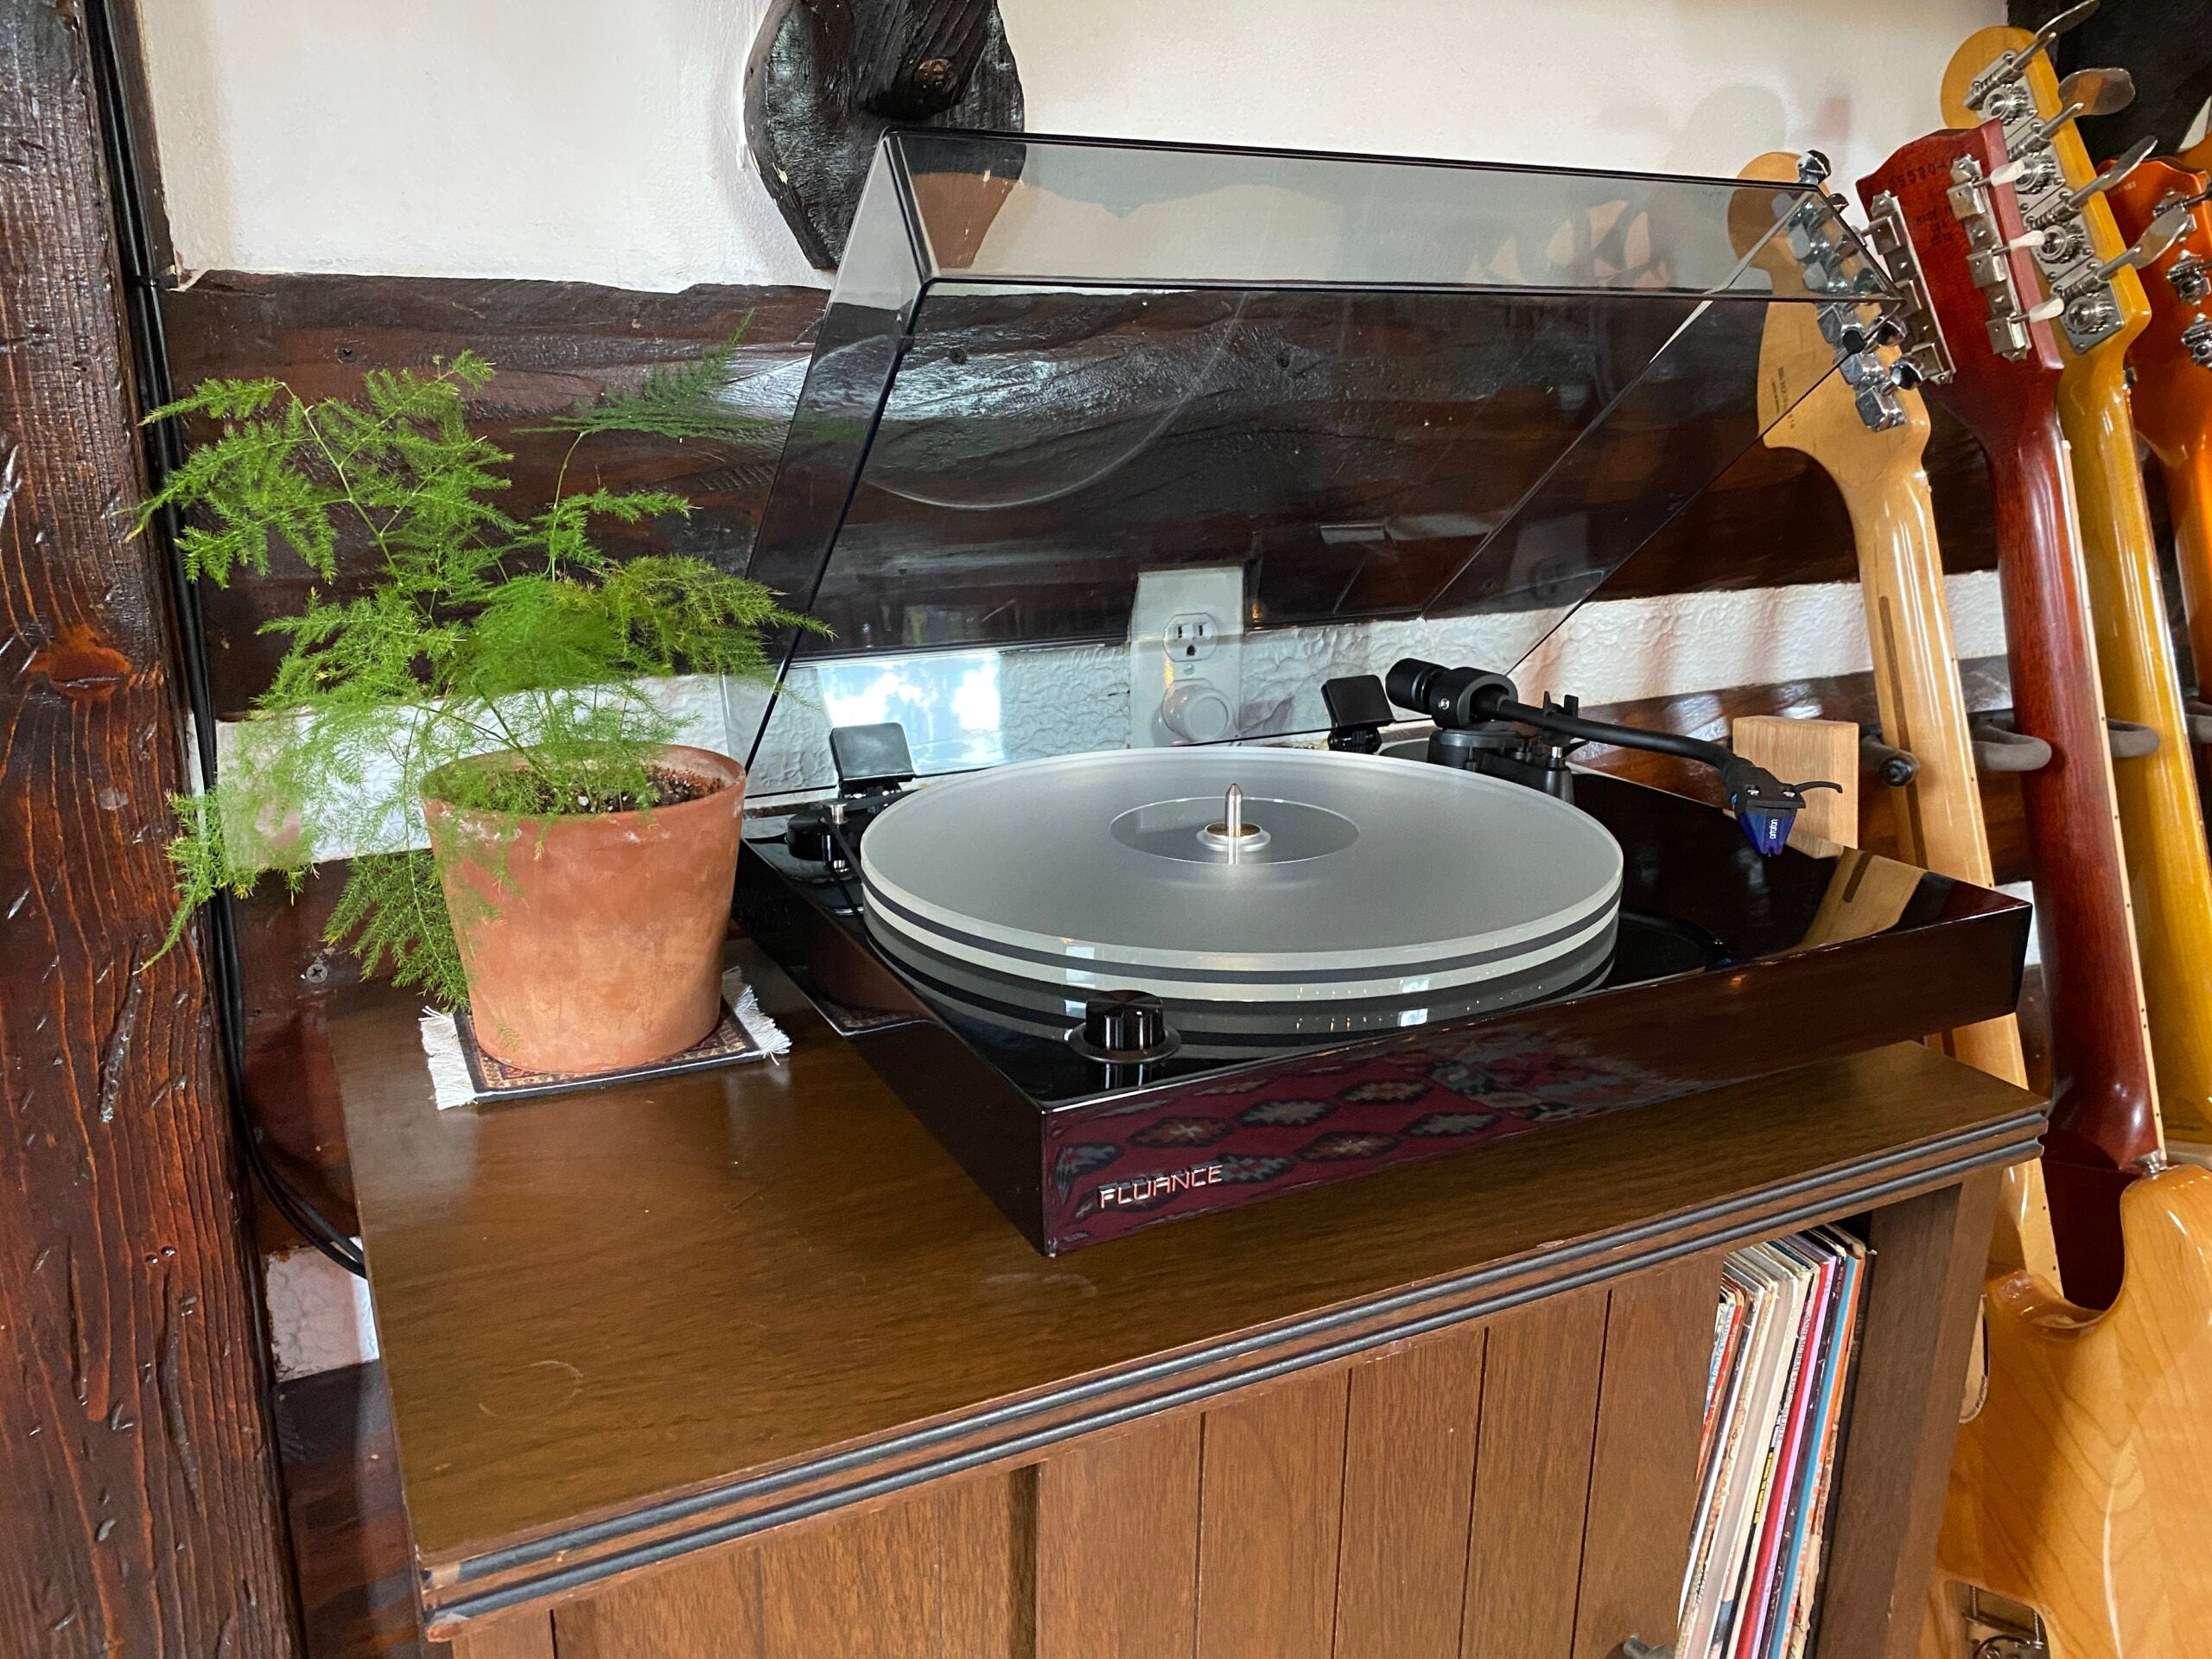 Fluance RT85 turntable review: At home with hi-fi | Popular Science